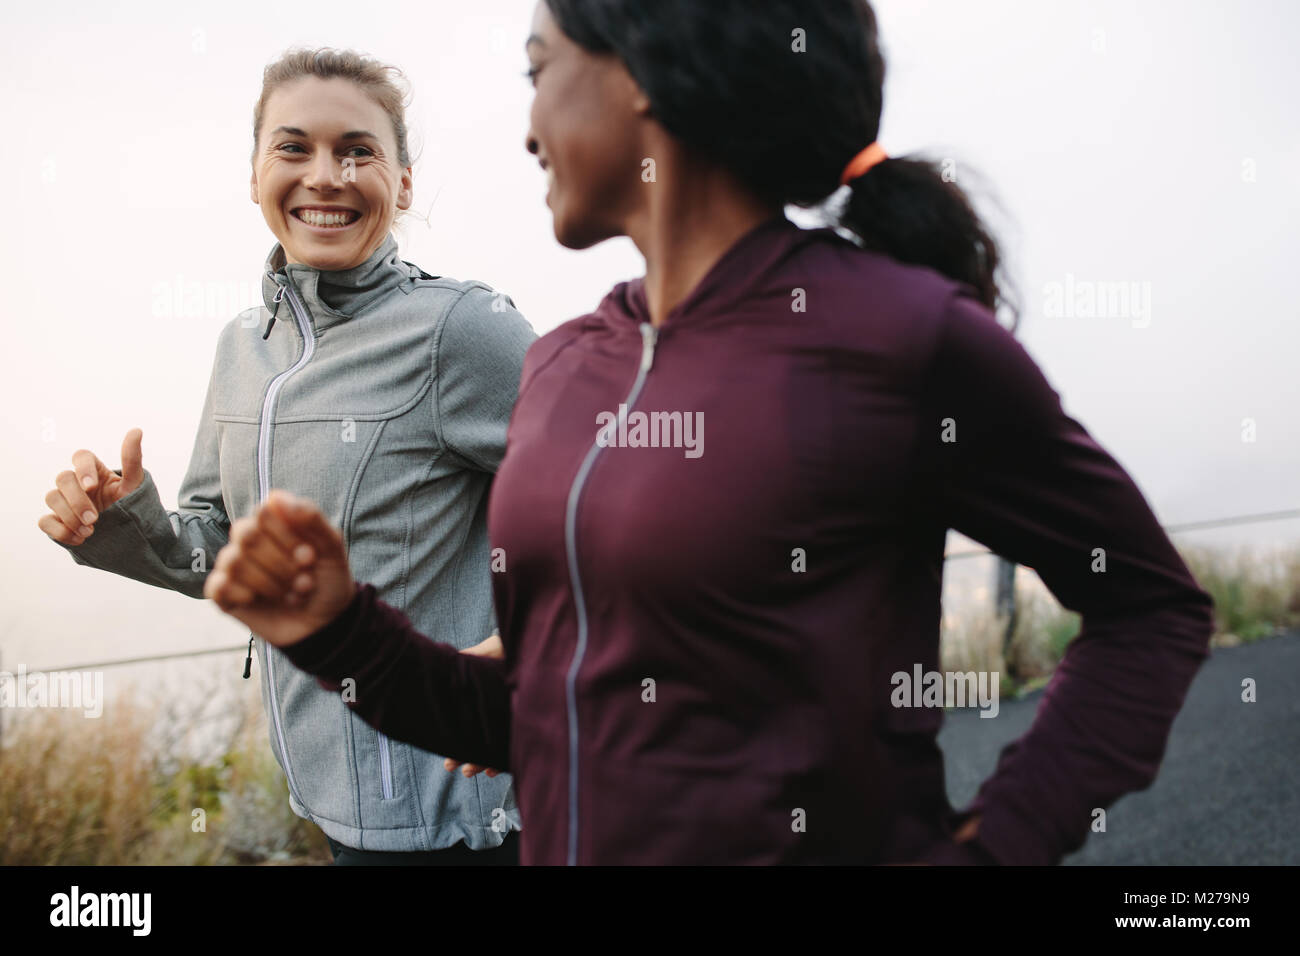 Two happy women going for sunrise running. Women in track suits running on road. Stock Photo